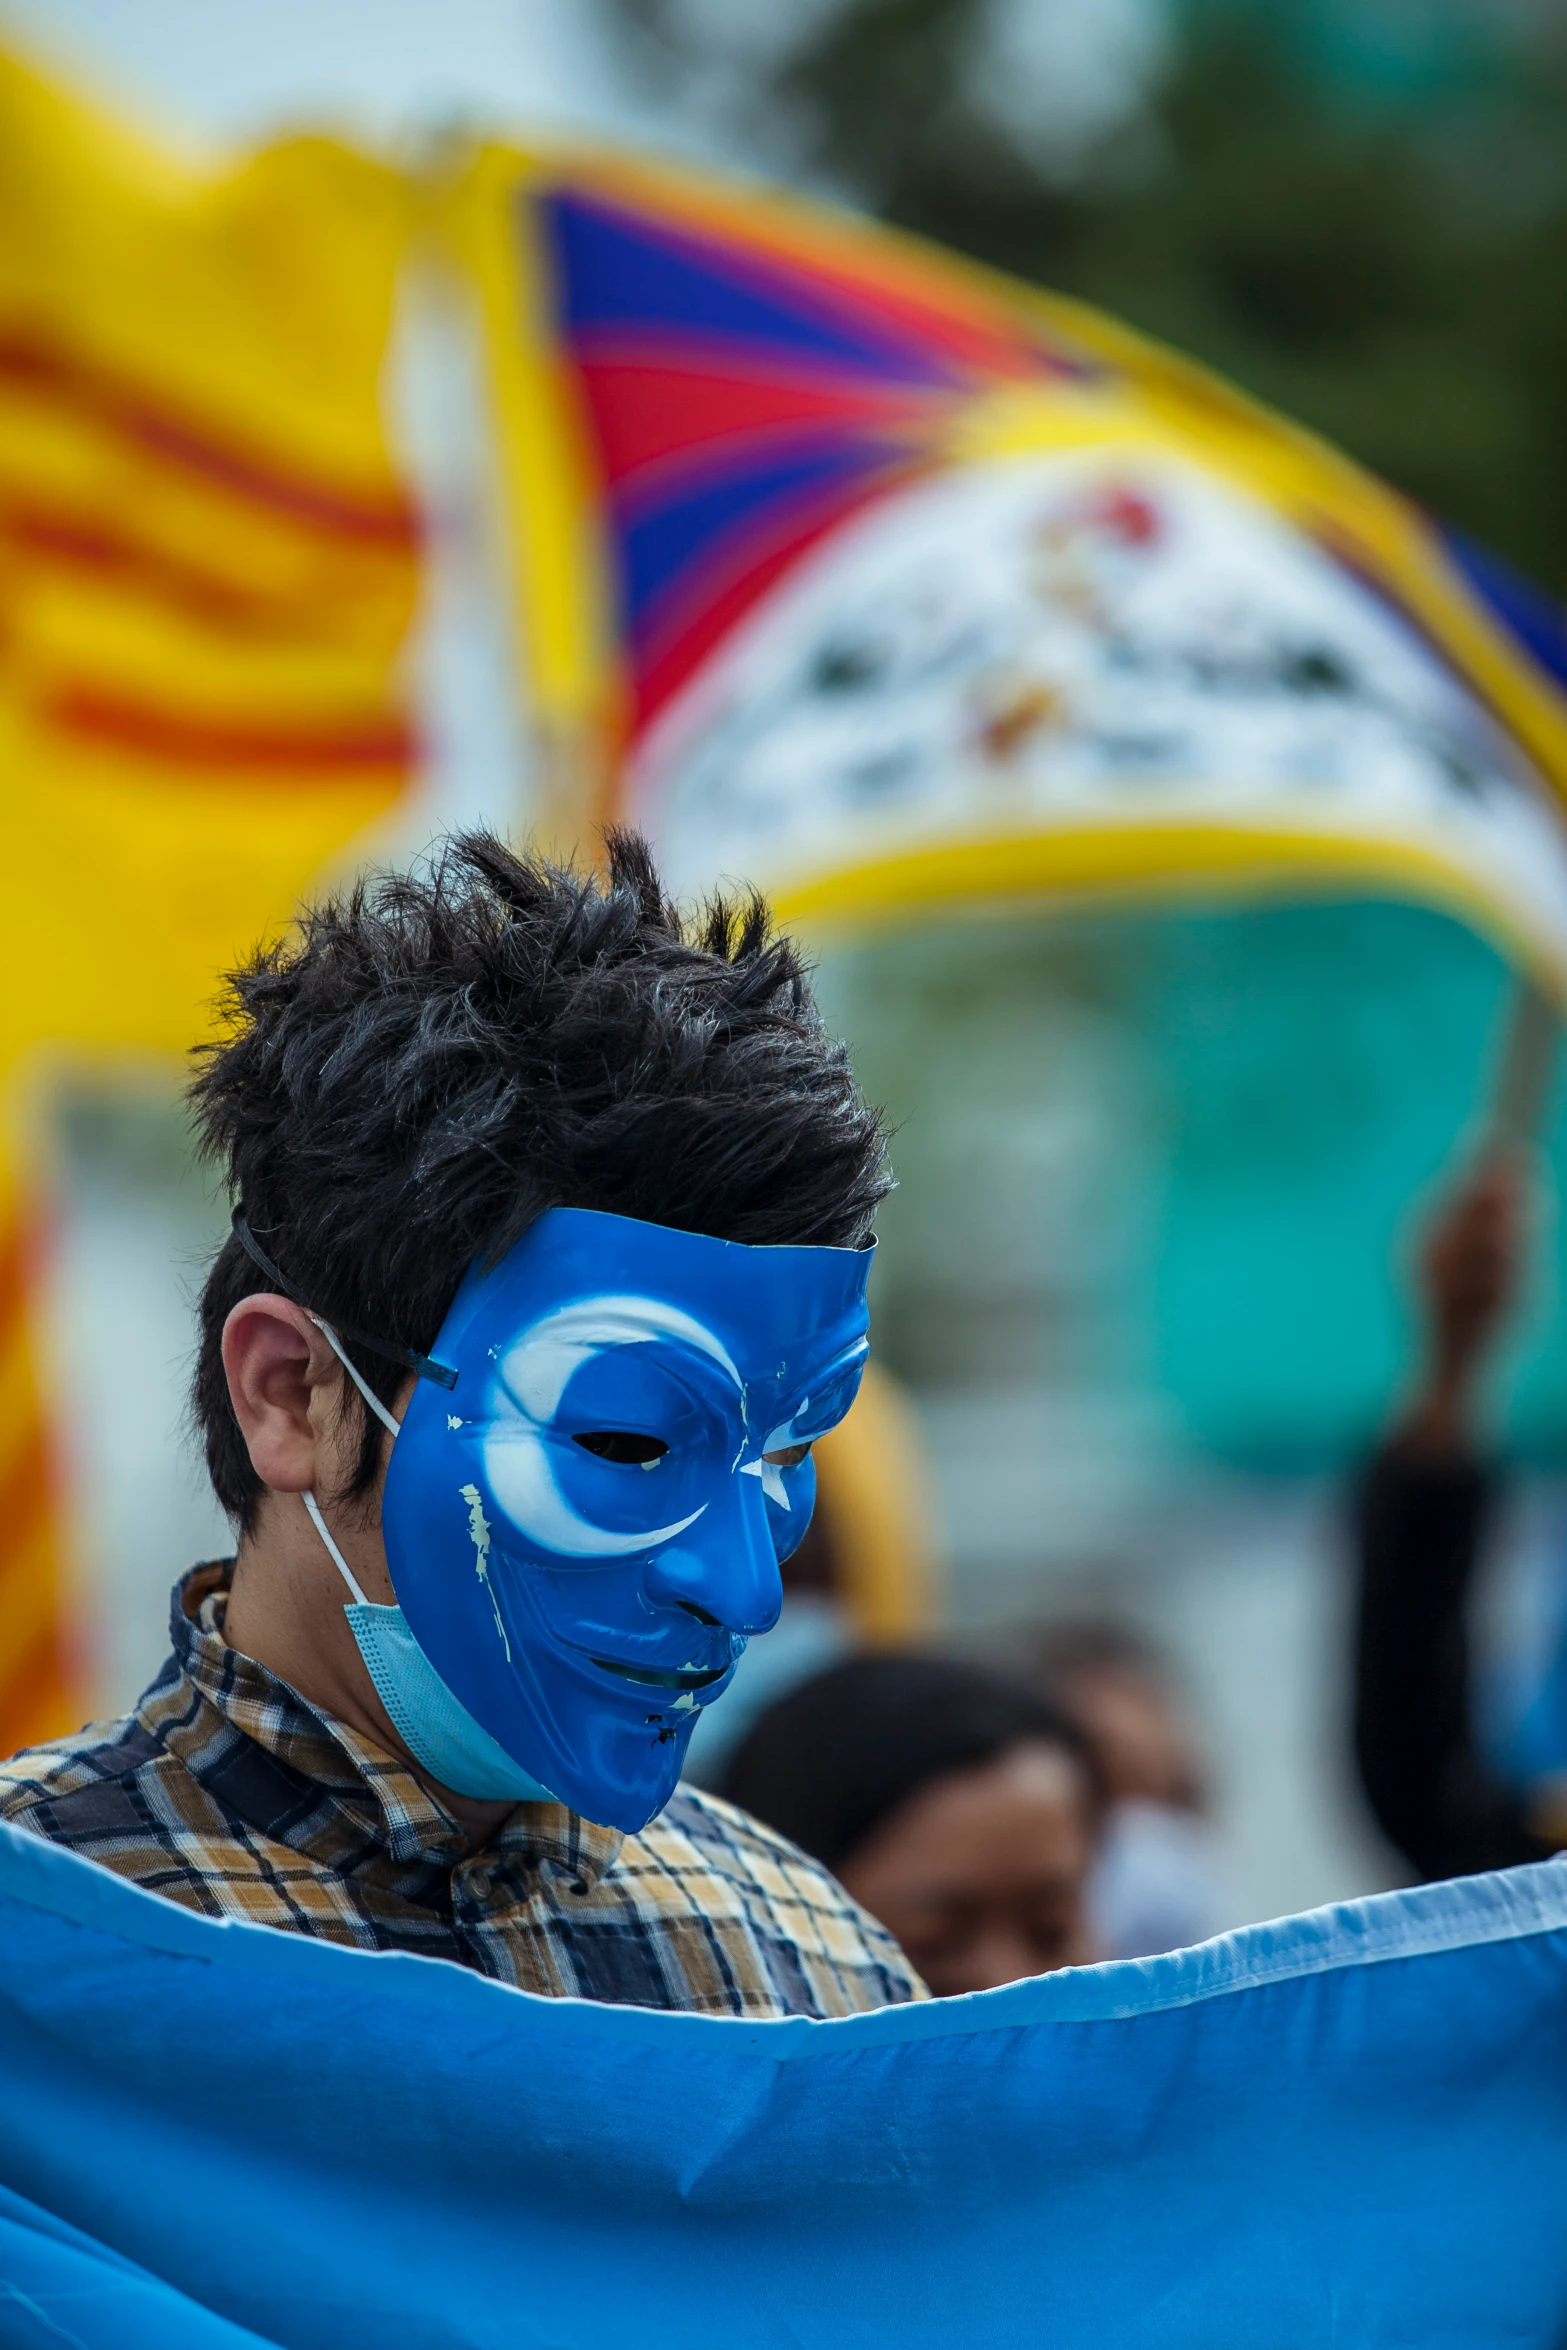 a boy with black hair and a blue face paint on